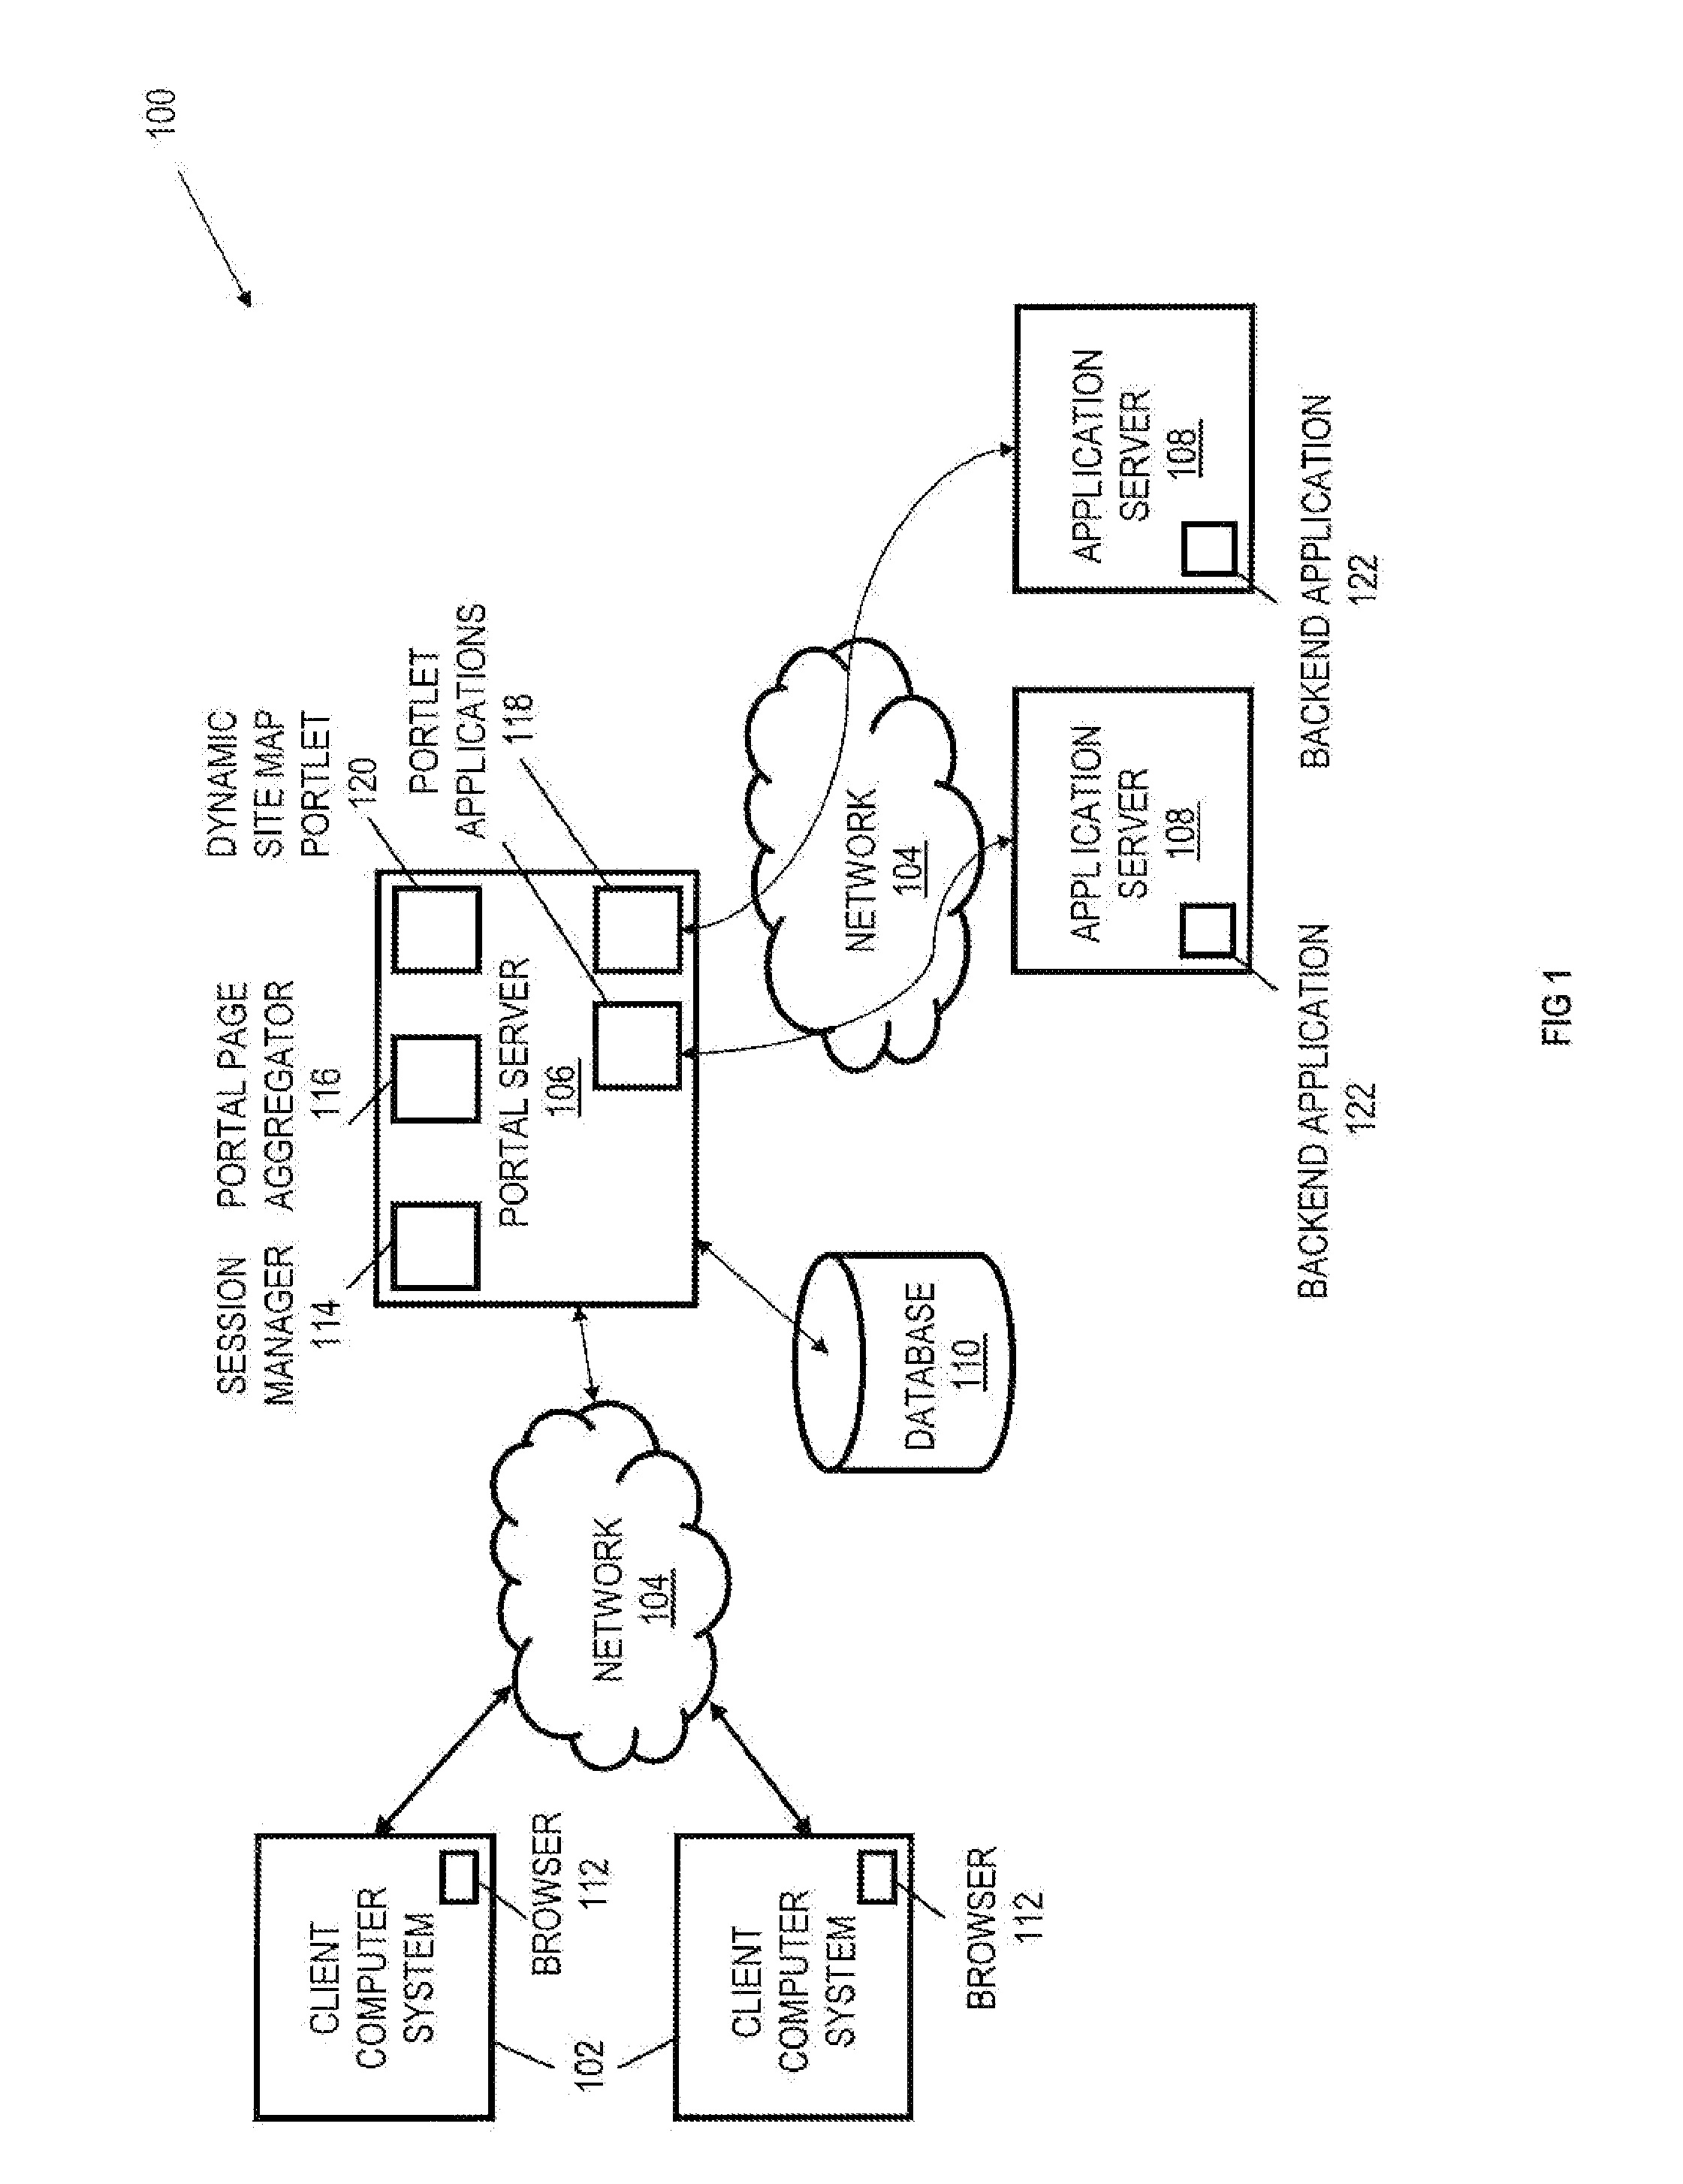 Systems, Methods, and Media for Dynamically Generating a Portal Site Map